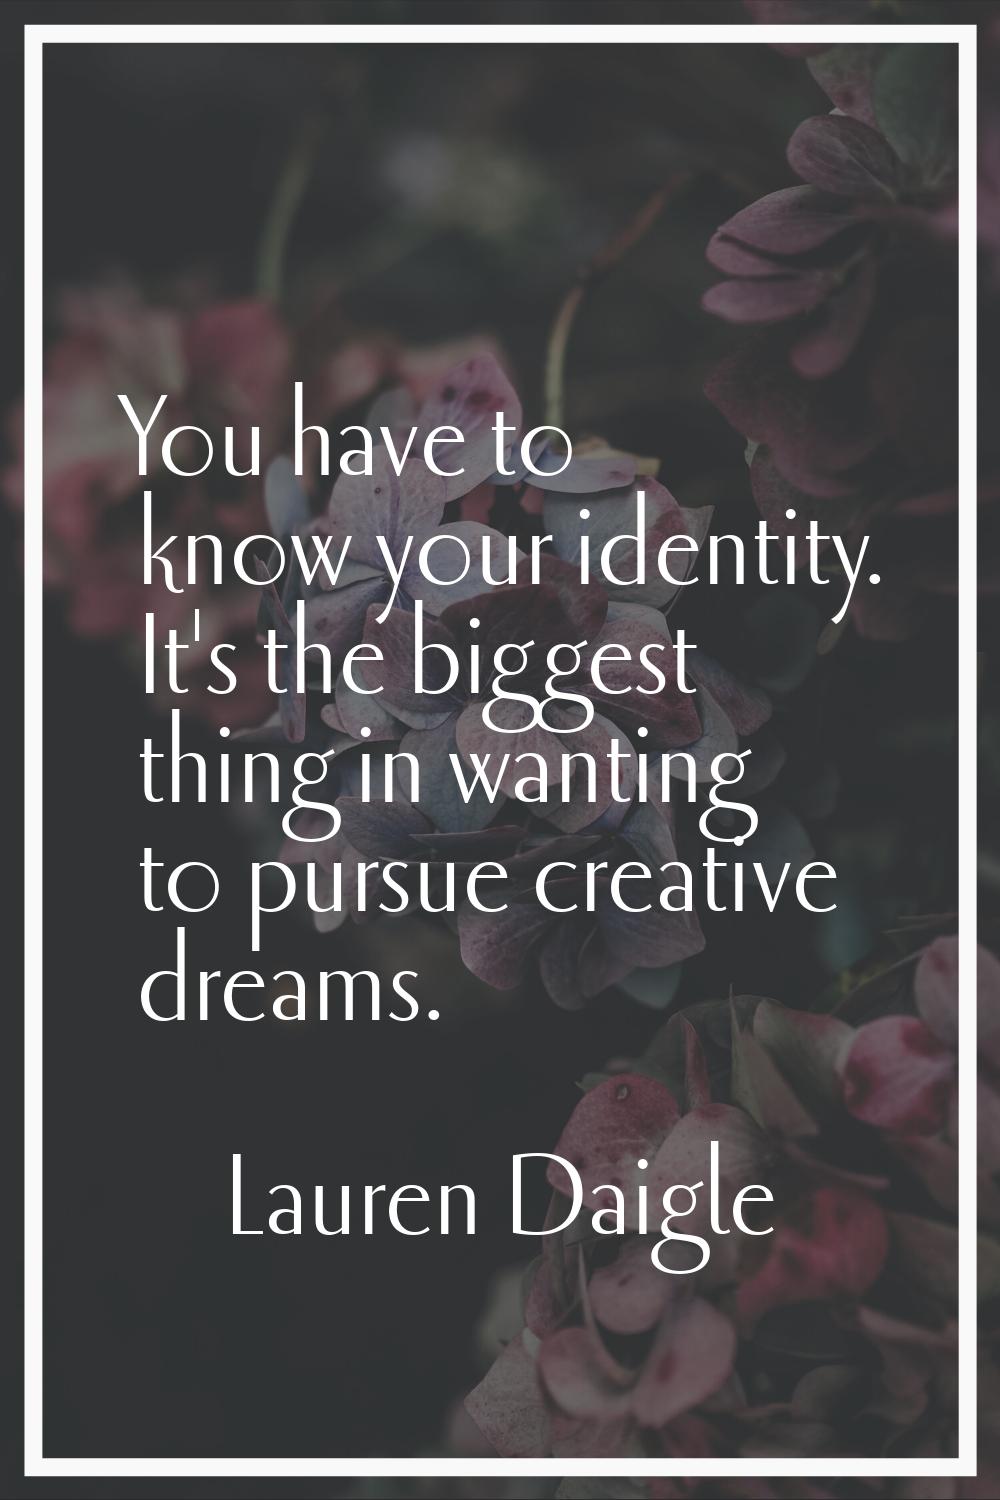 You have to know your identity. It's the biggest thing in wanting to pursue creative dreams.